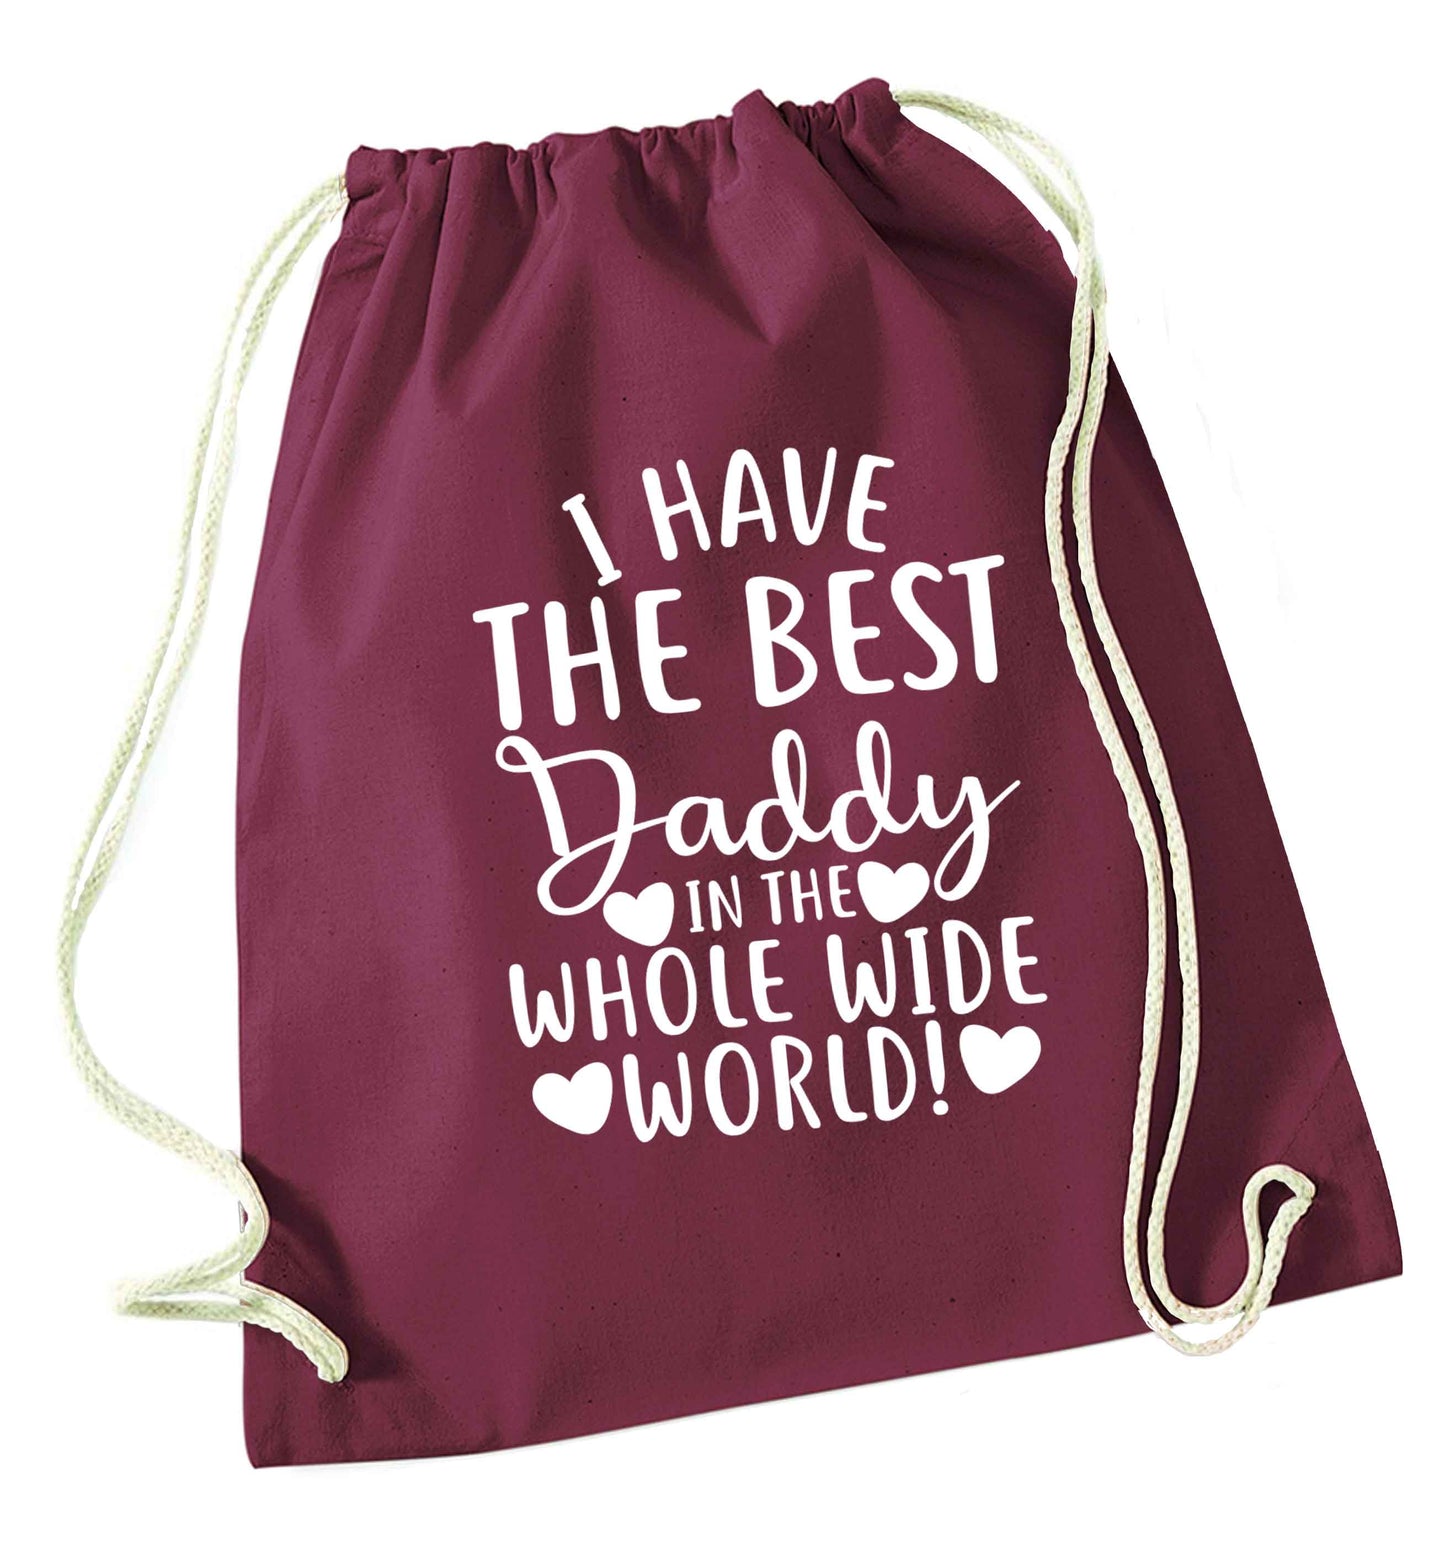 I have the best daddy in the whole wide world maroon drawstring bag